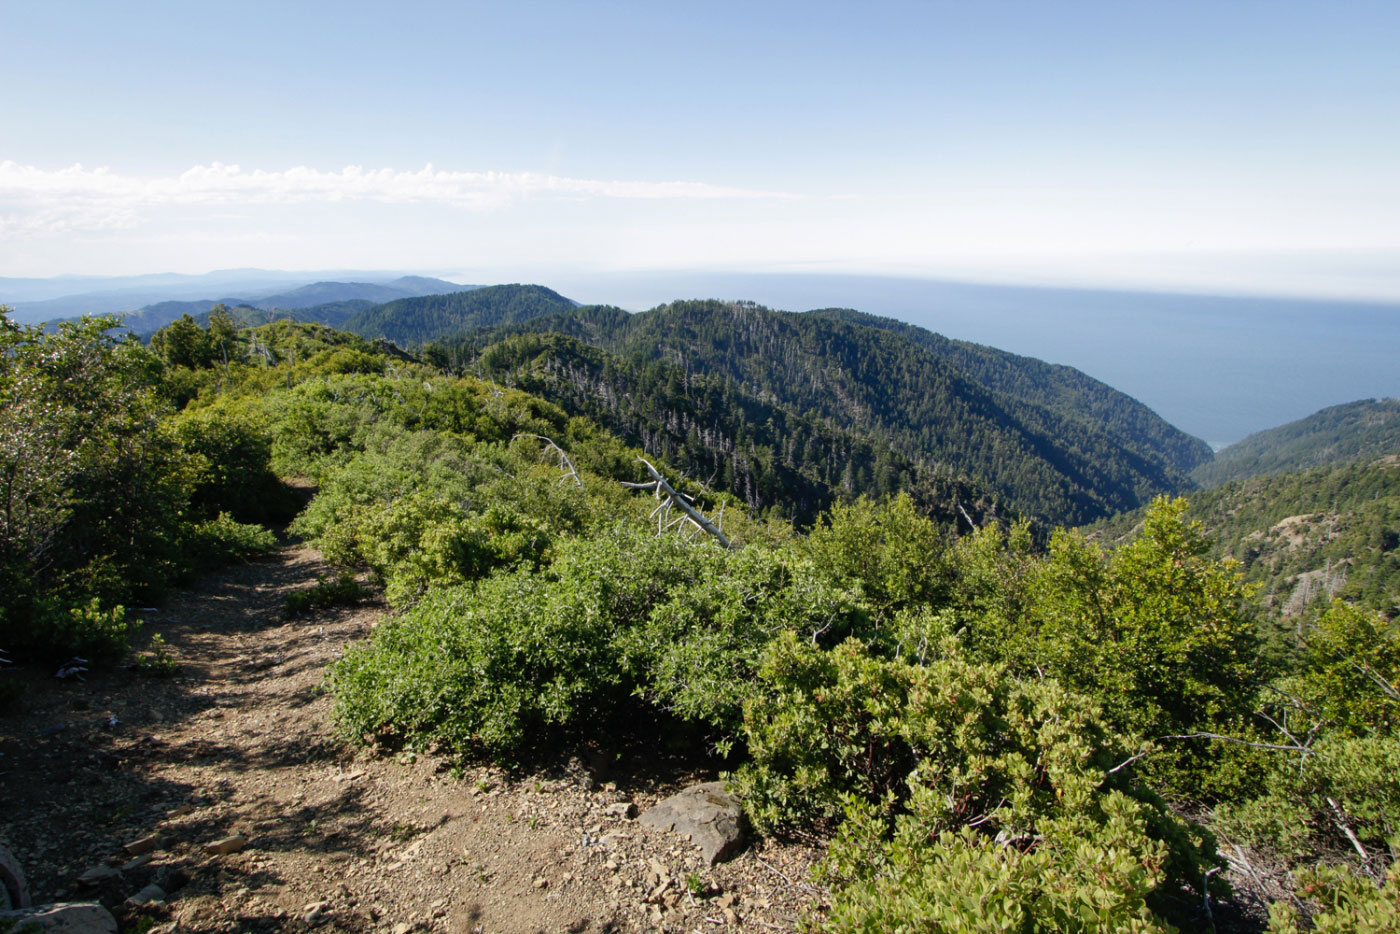 Hike King Peak from Saddle Mountain in King Range National Conservation Area, California - Stav is Lost